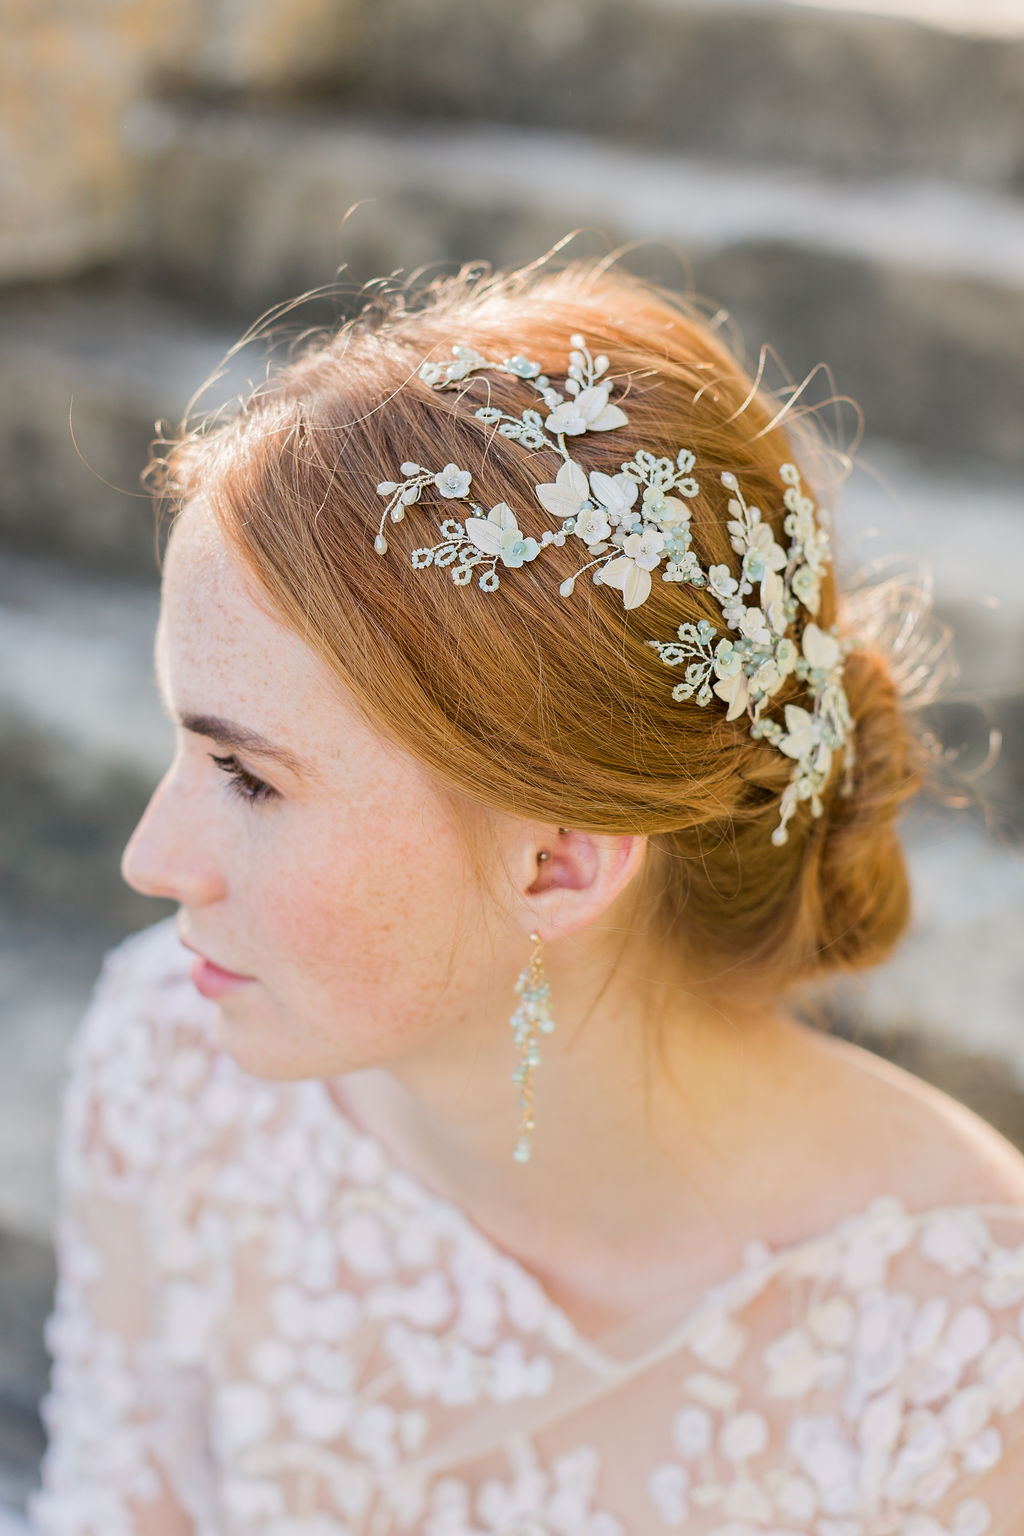 Clare Lloyd Accessories are UK bridal hair designs beautifully handmade for a luxury bridal look